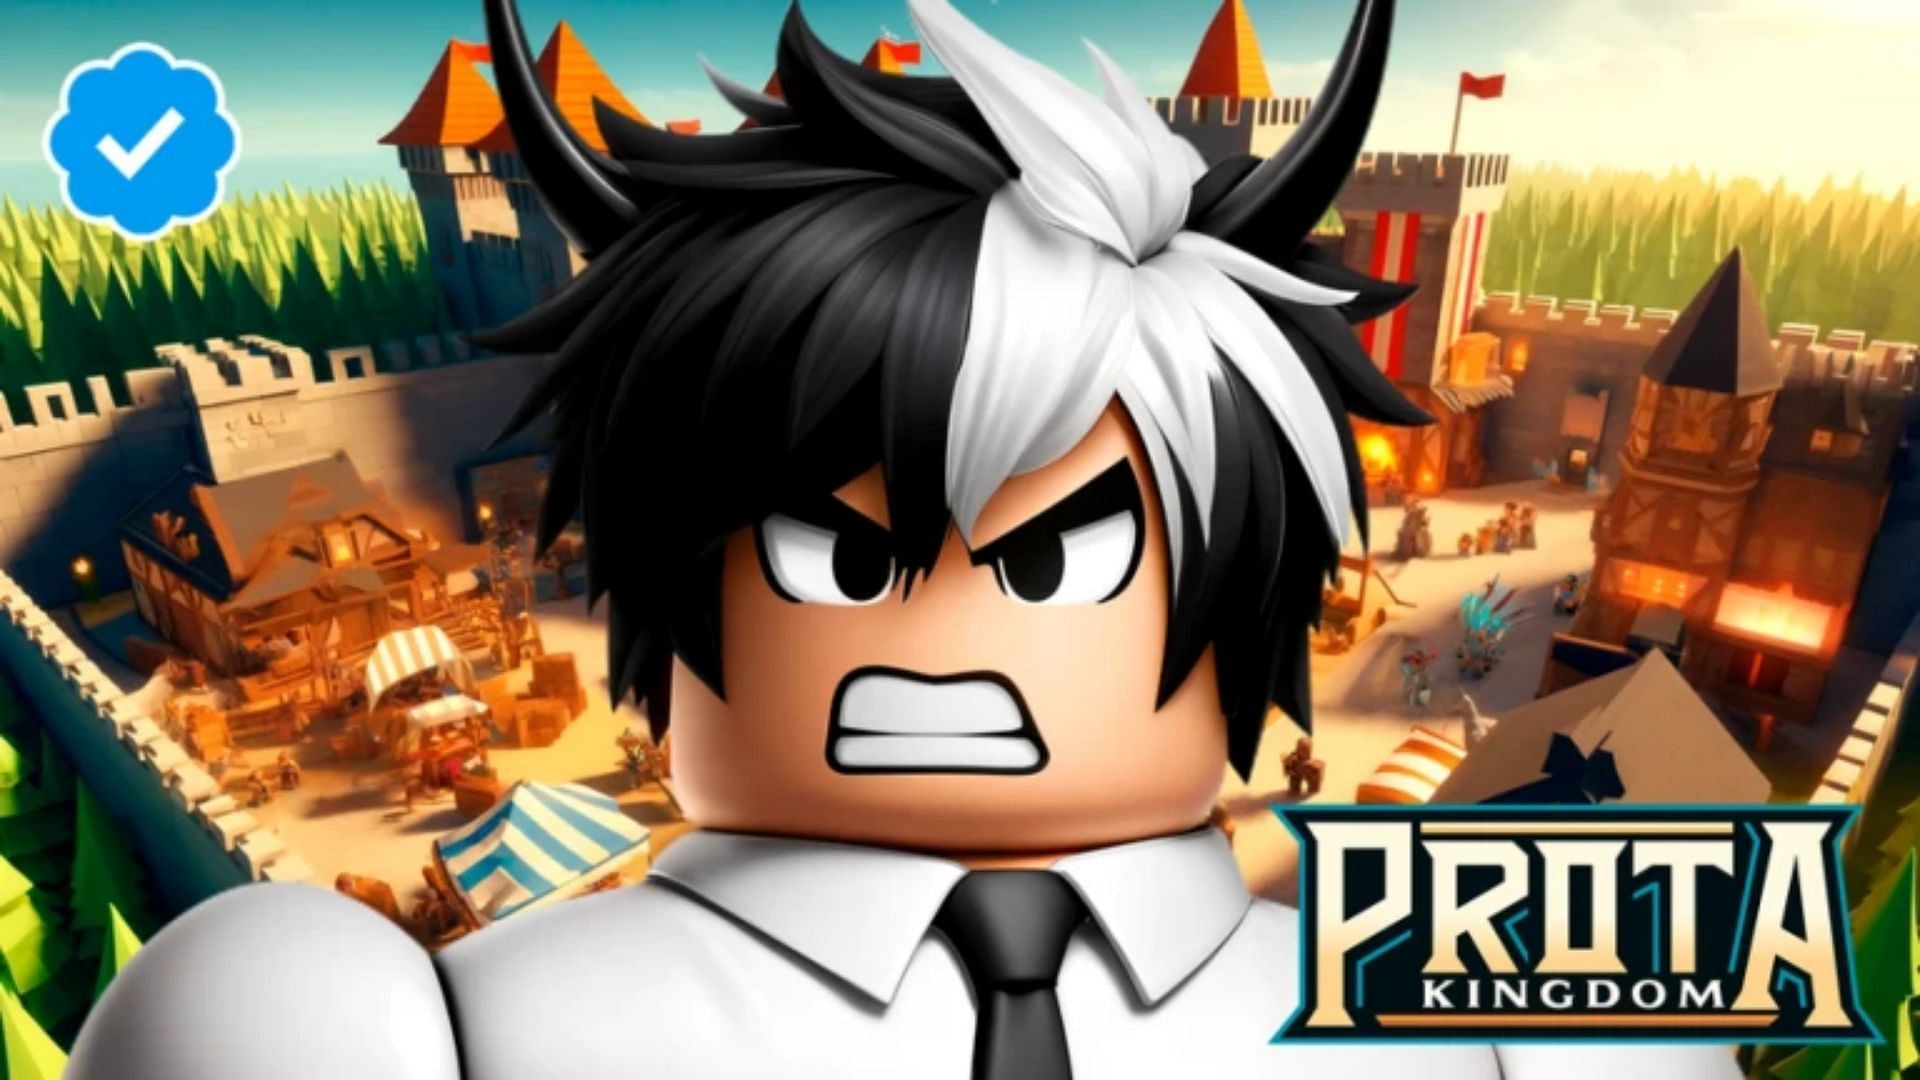 Official cover art for the game (Image via Roblox)